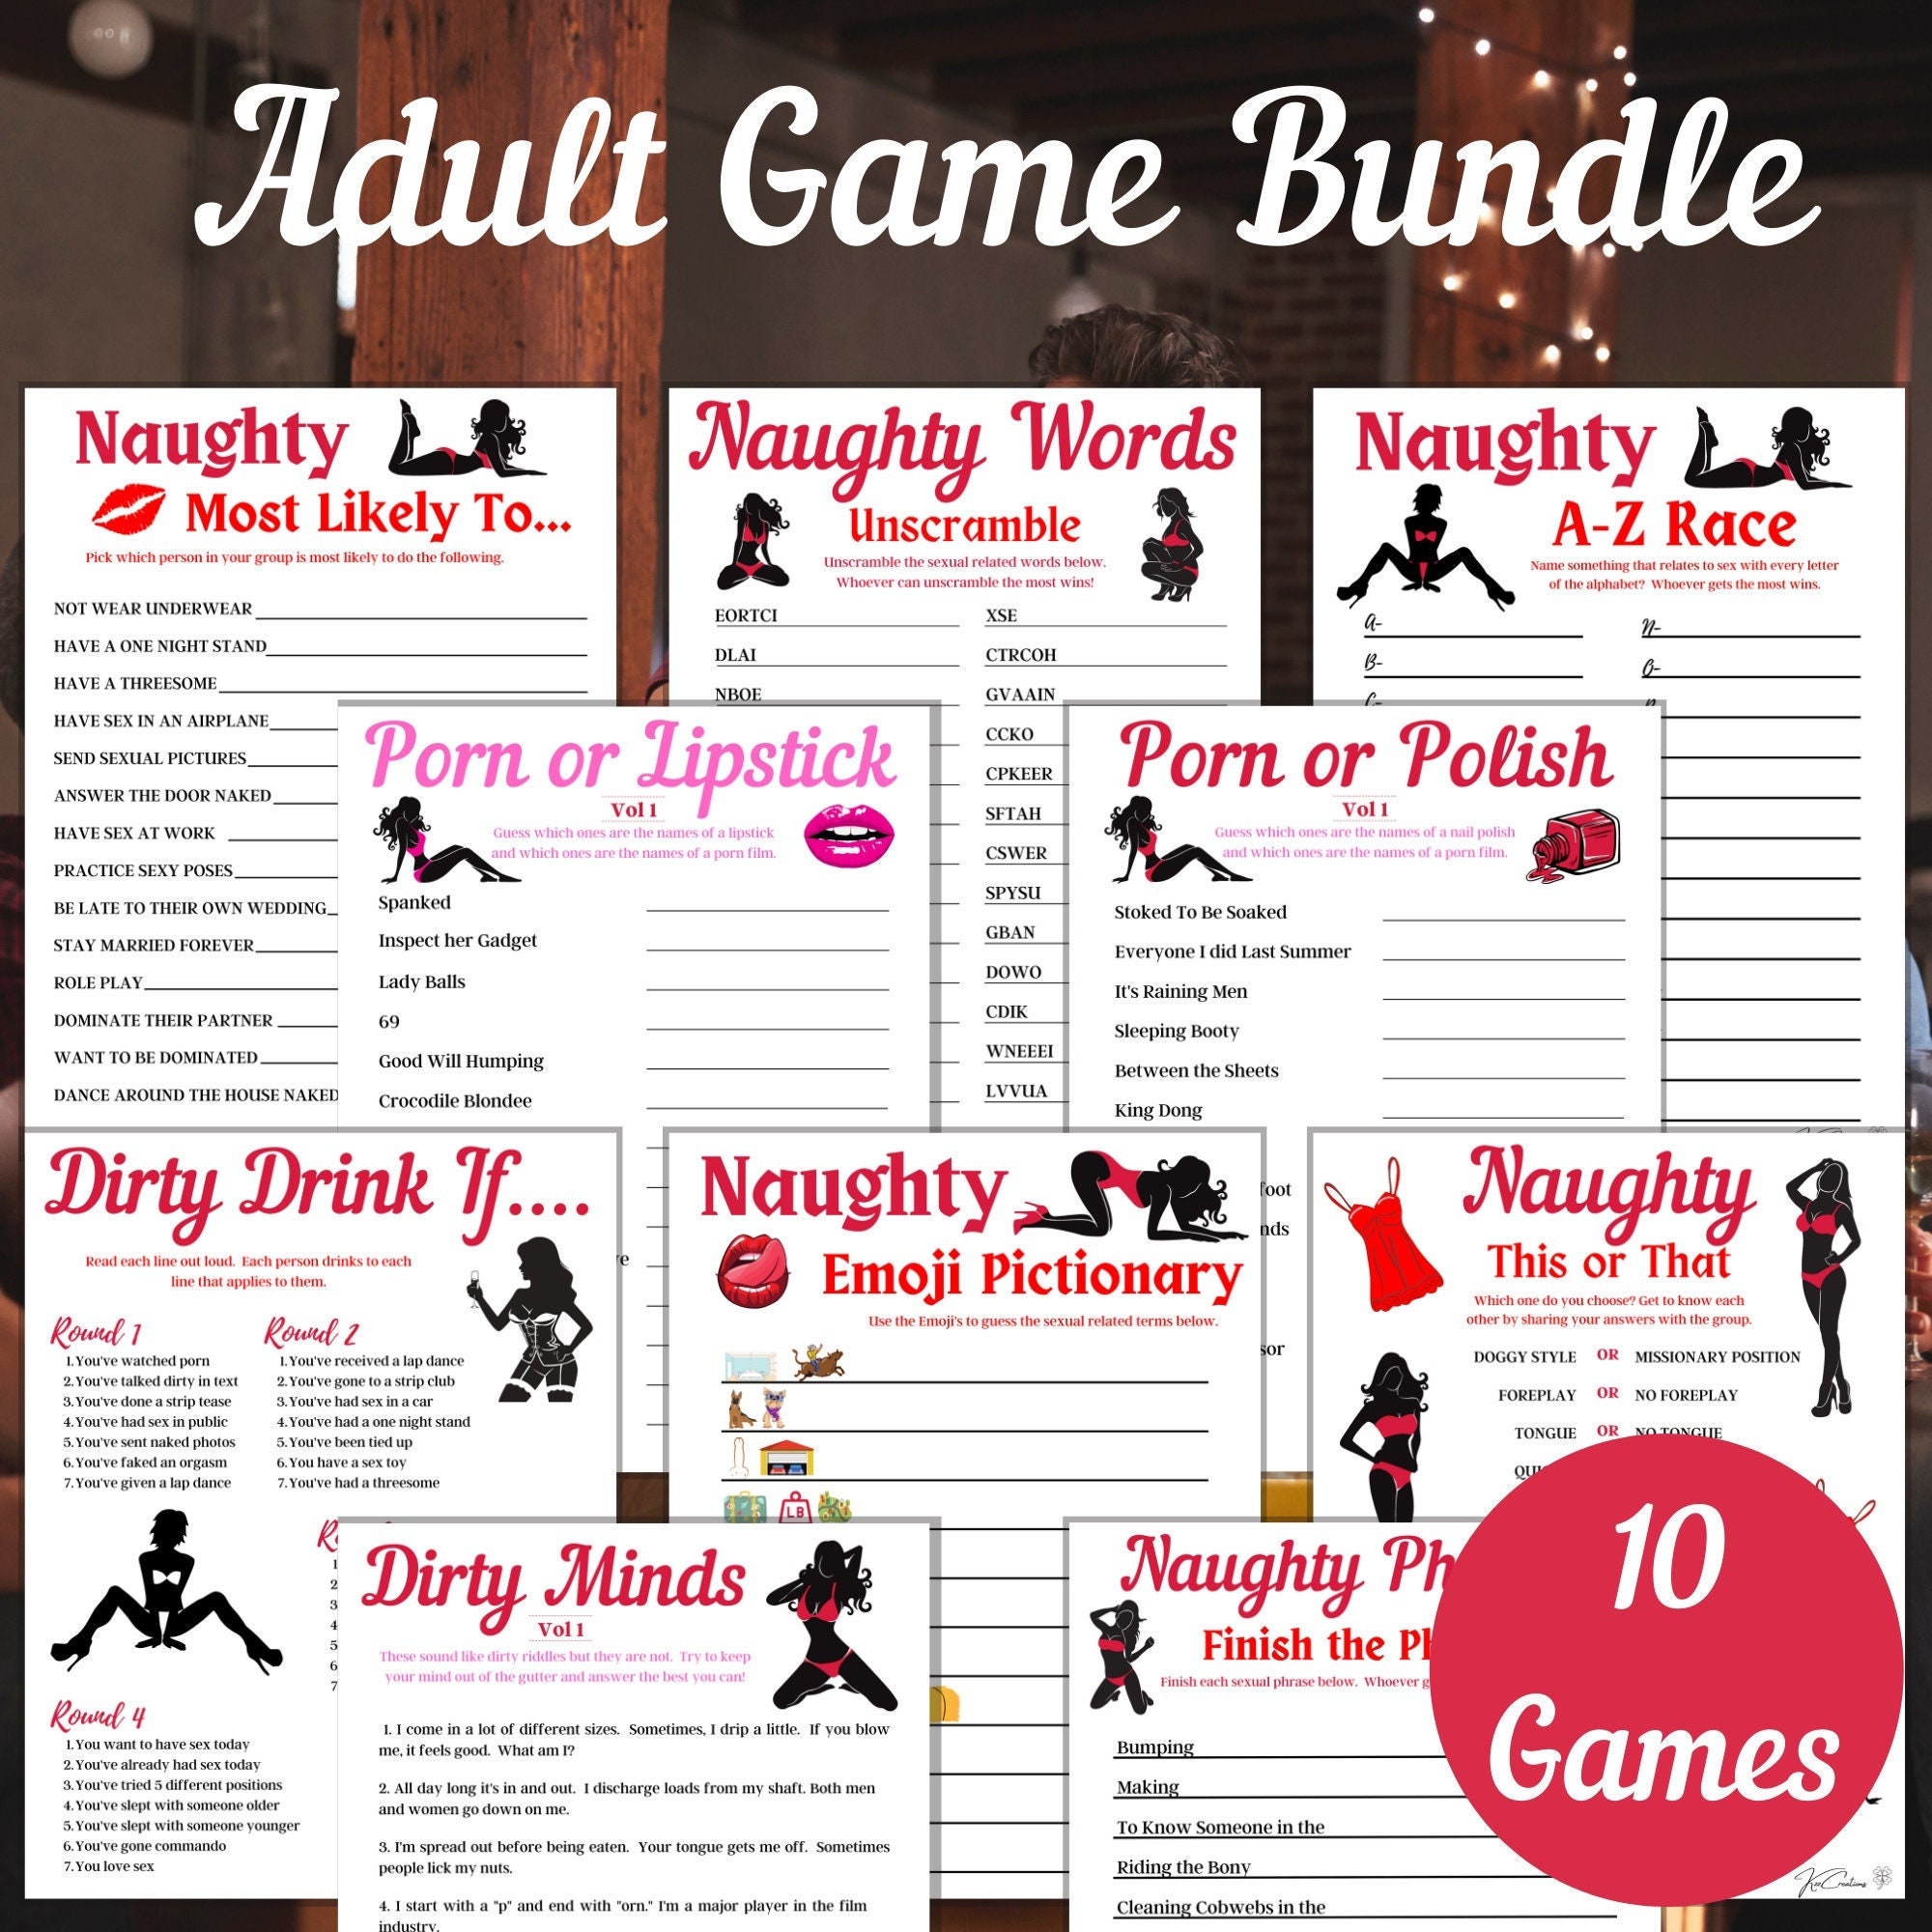 Adult Game Bundle Naughty Games Girls Night Out Stag Do picture picture